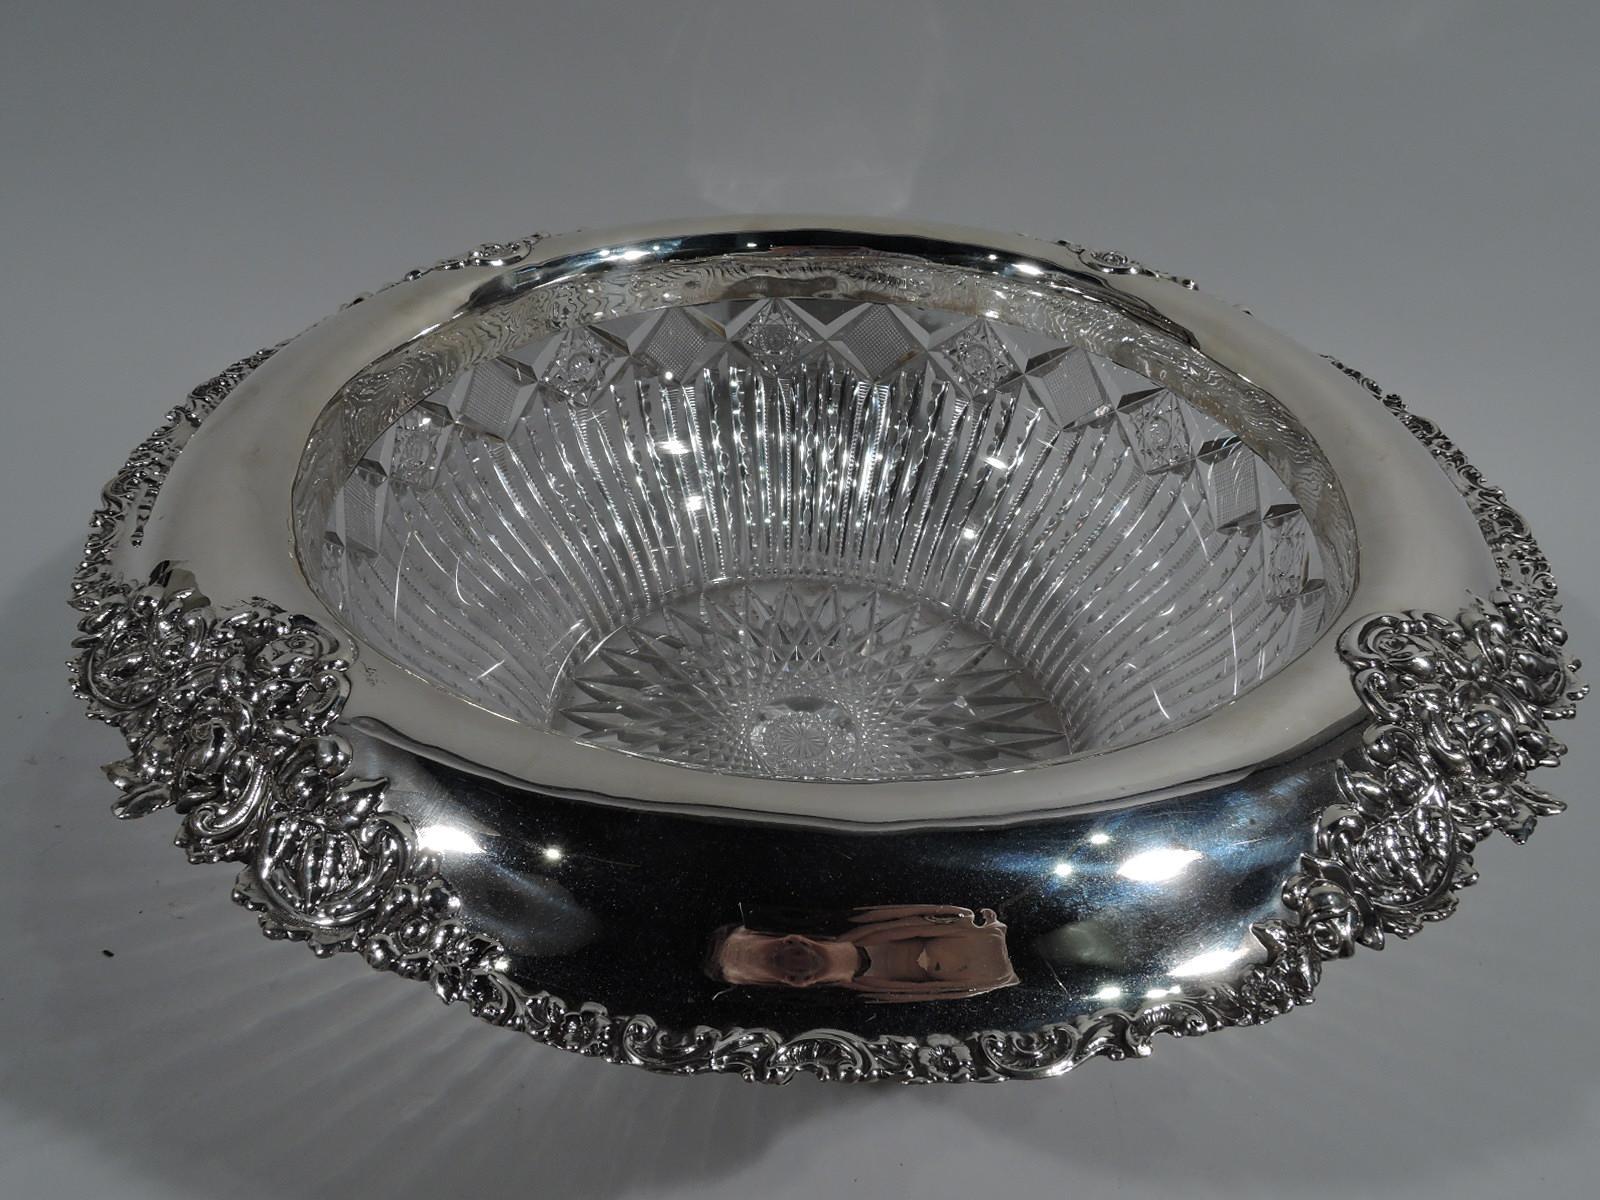 American brilliant-cut glass punch bowl with sterling silver collar, circa 1900. Bowl has curved sides with diaper border over flutes and notches. Star on underside. Turned-down and scrolled rim with applied flower bunches. Indistinct maker’s mark